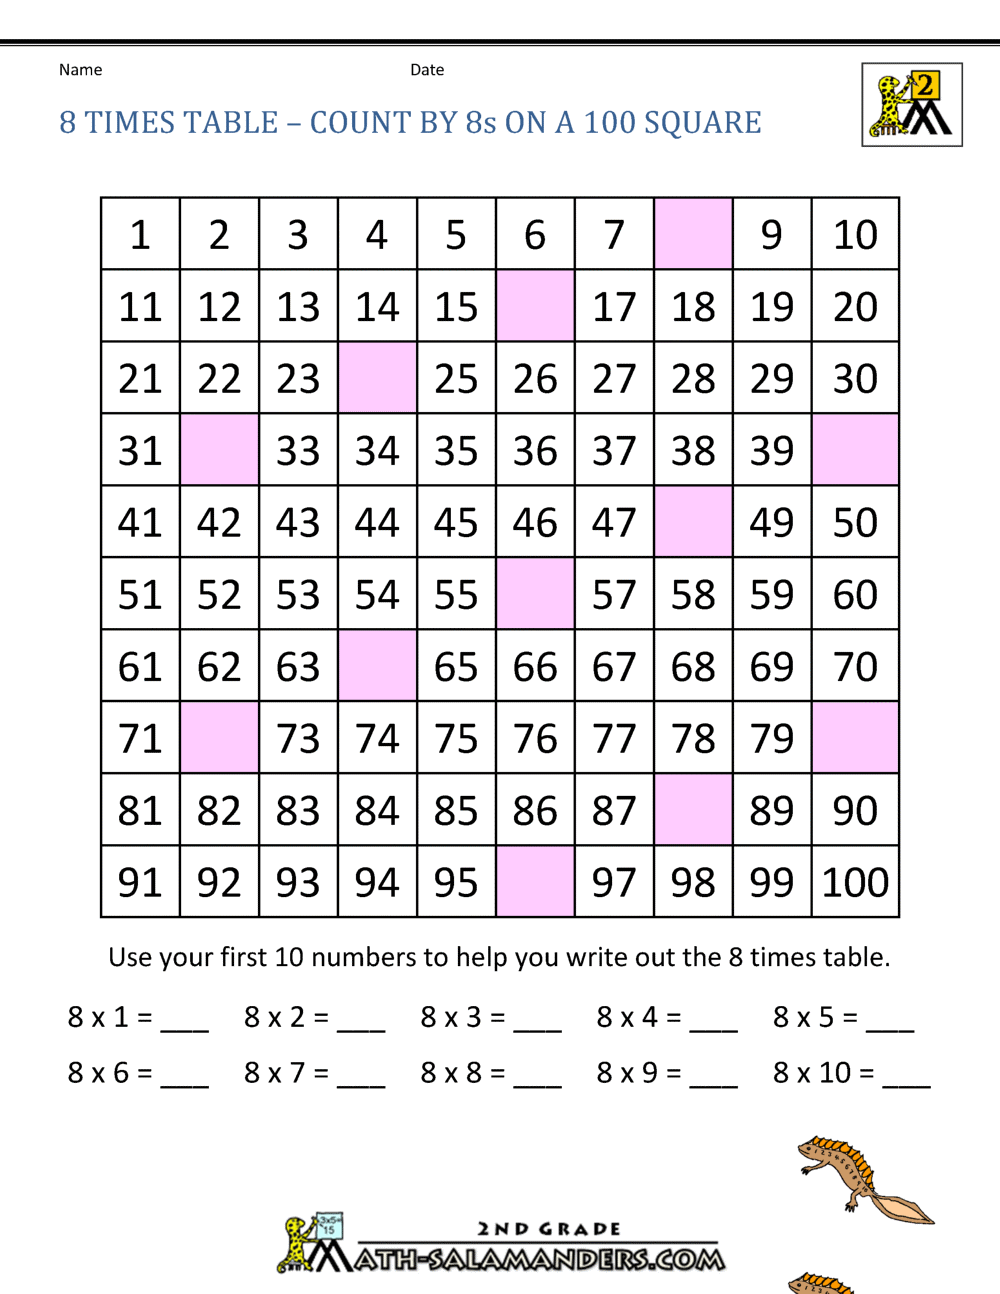 8-times-table